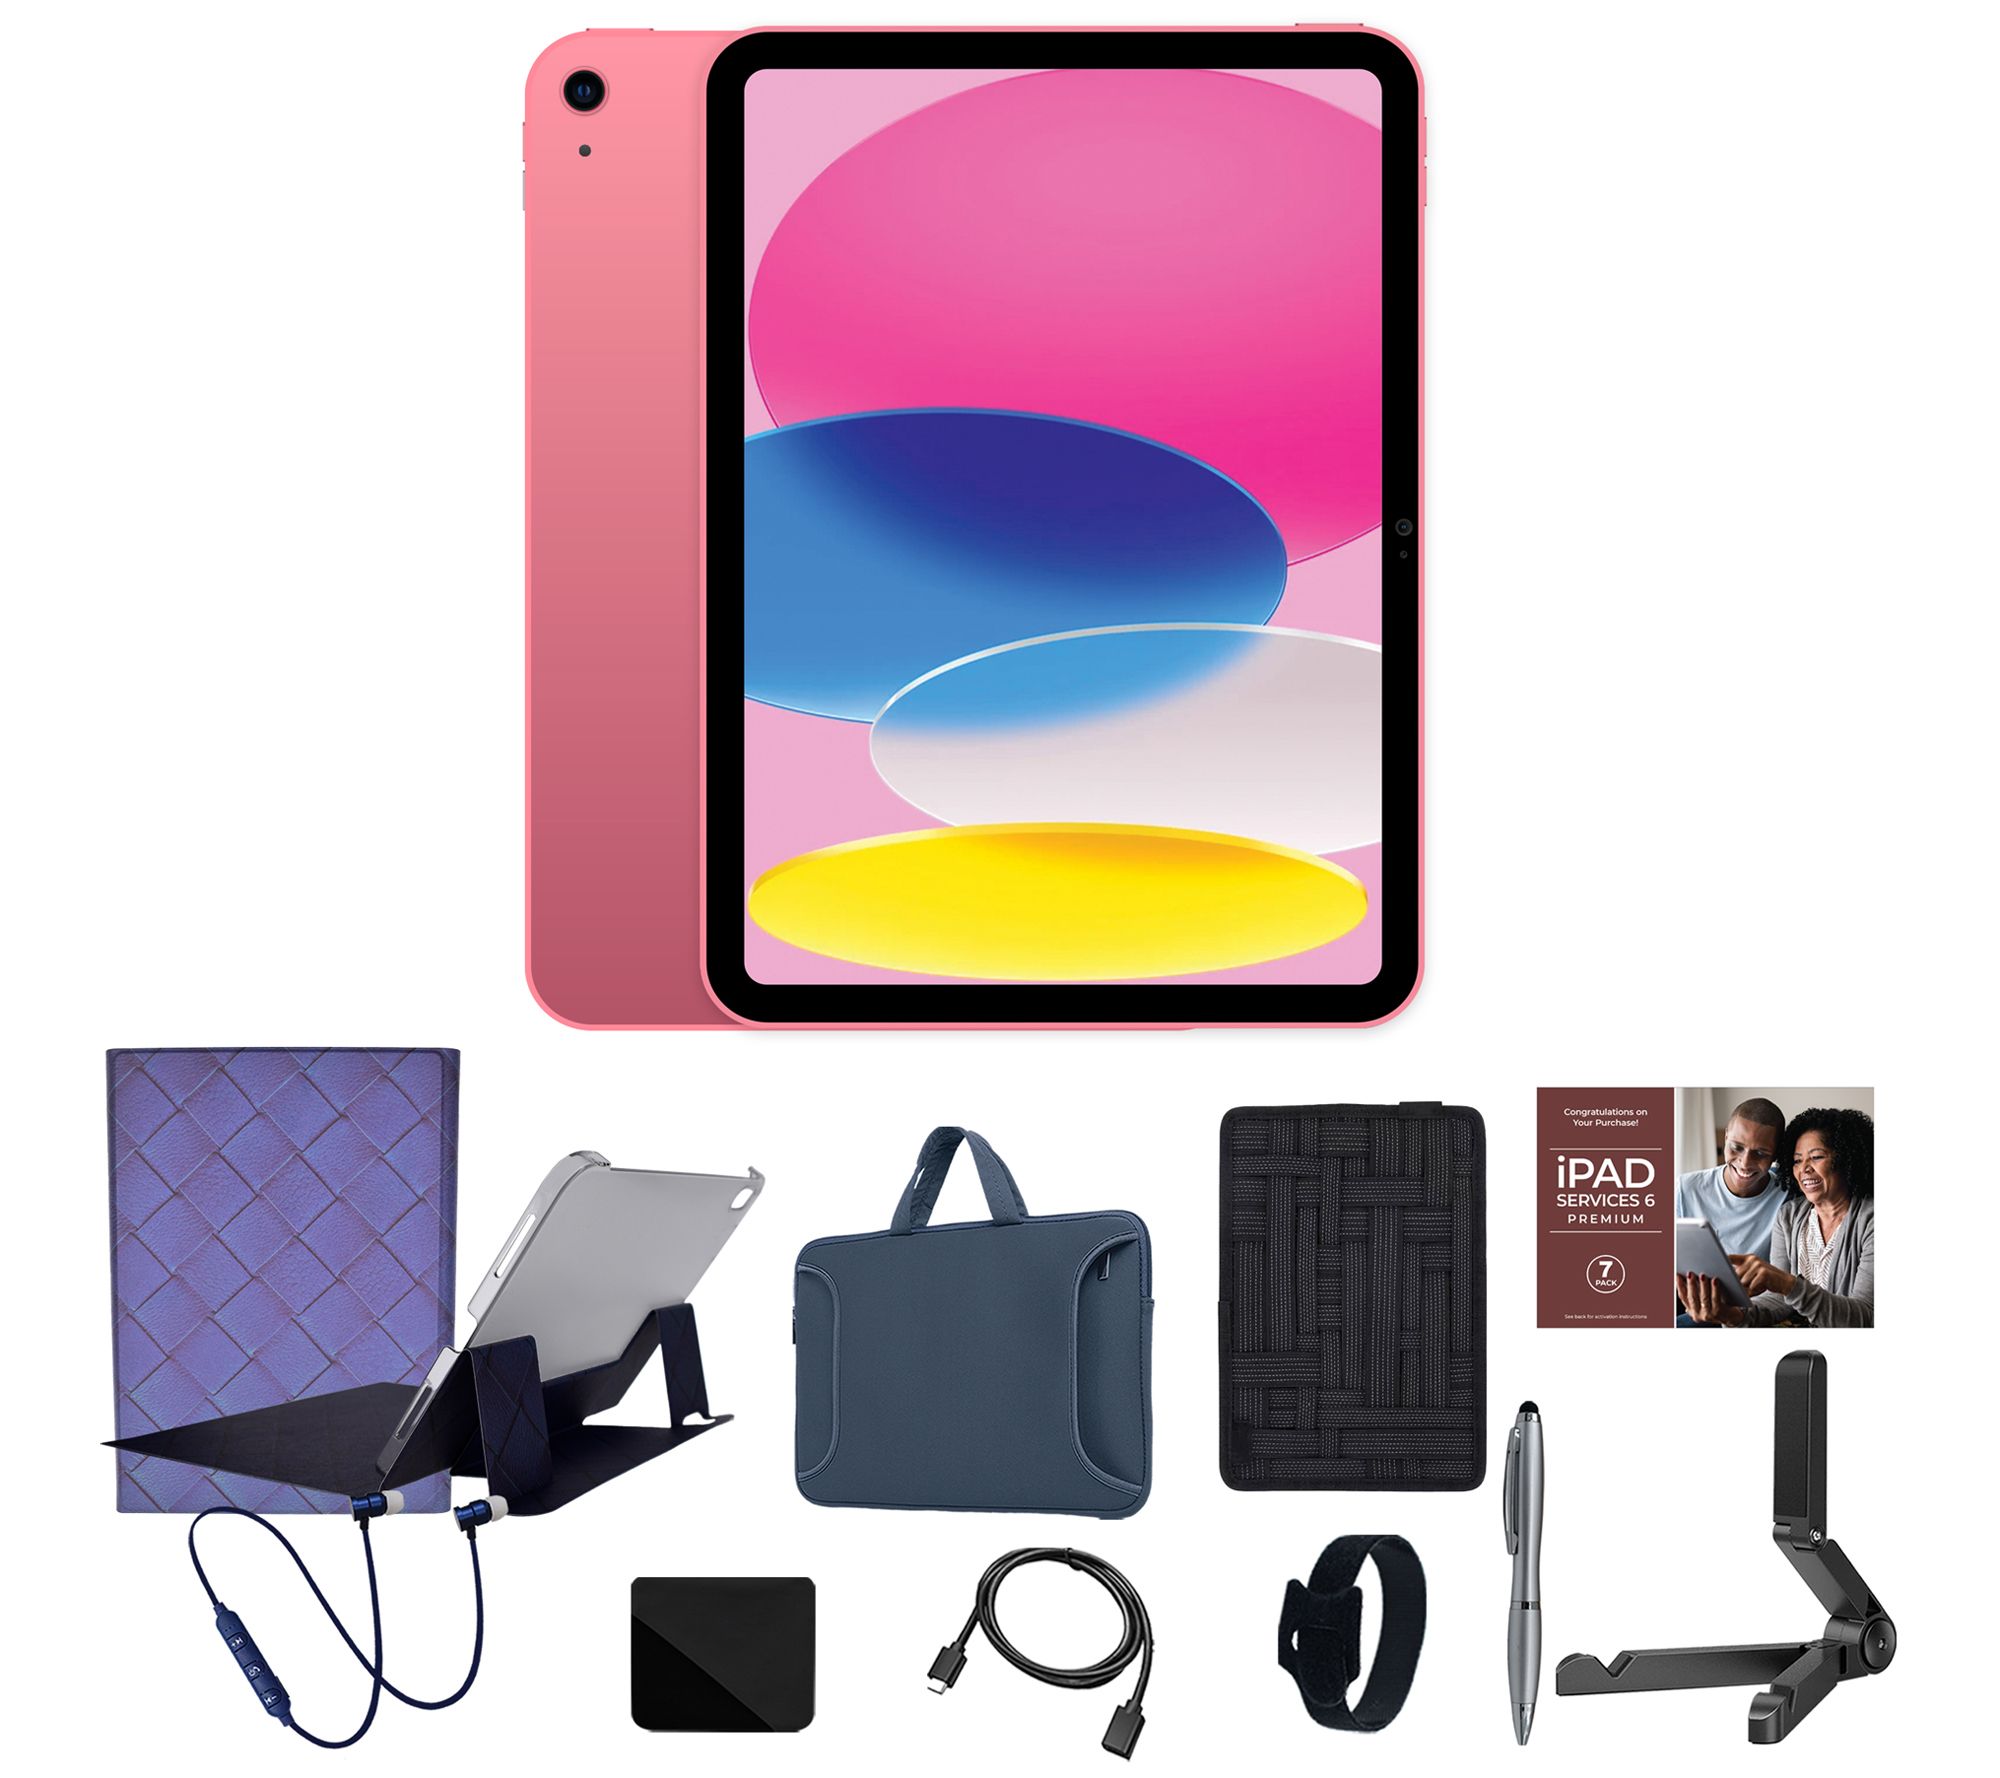 Apple iPad 9th Gen 10.2 256GB Wi-Fi with Voucher and Accessories 